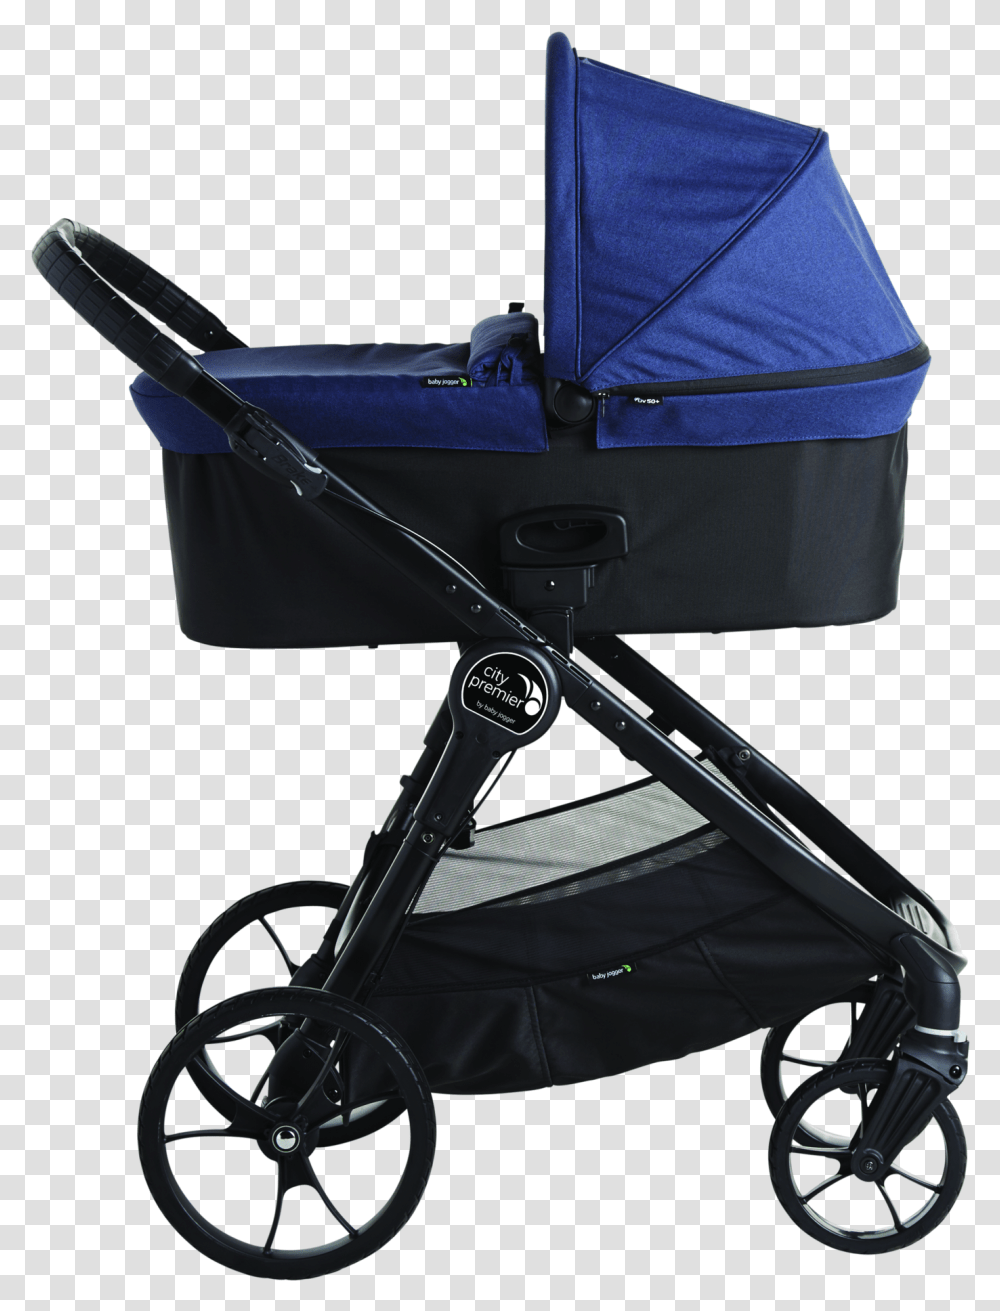 Baby Carriage Baby Jogger City Premier Bag, Stroller, Bicycle, Vehicle, Transportation Transparent Png